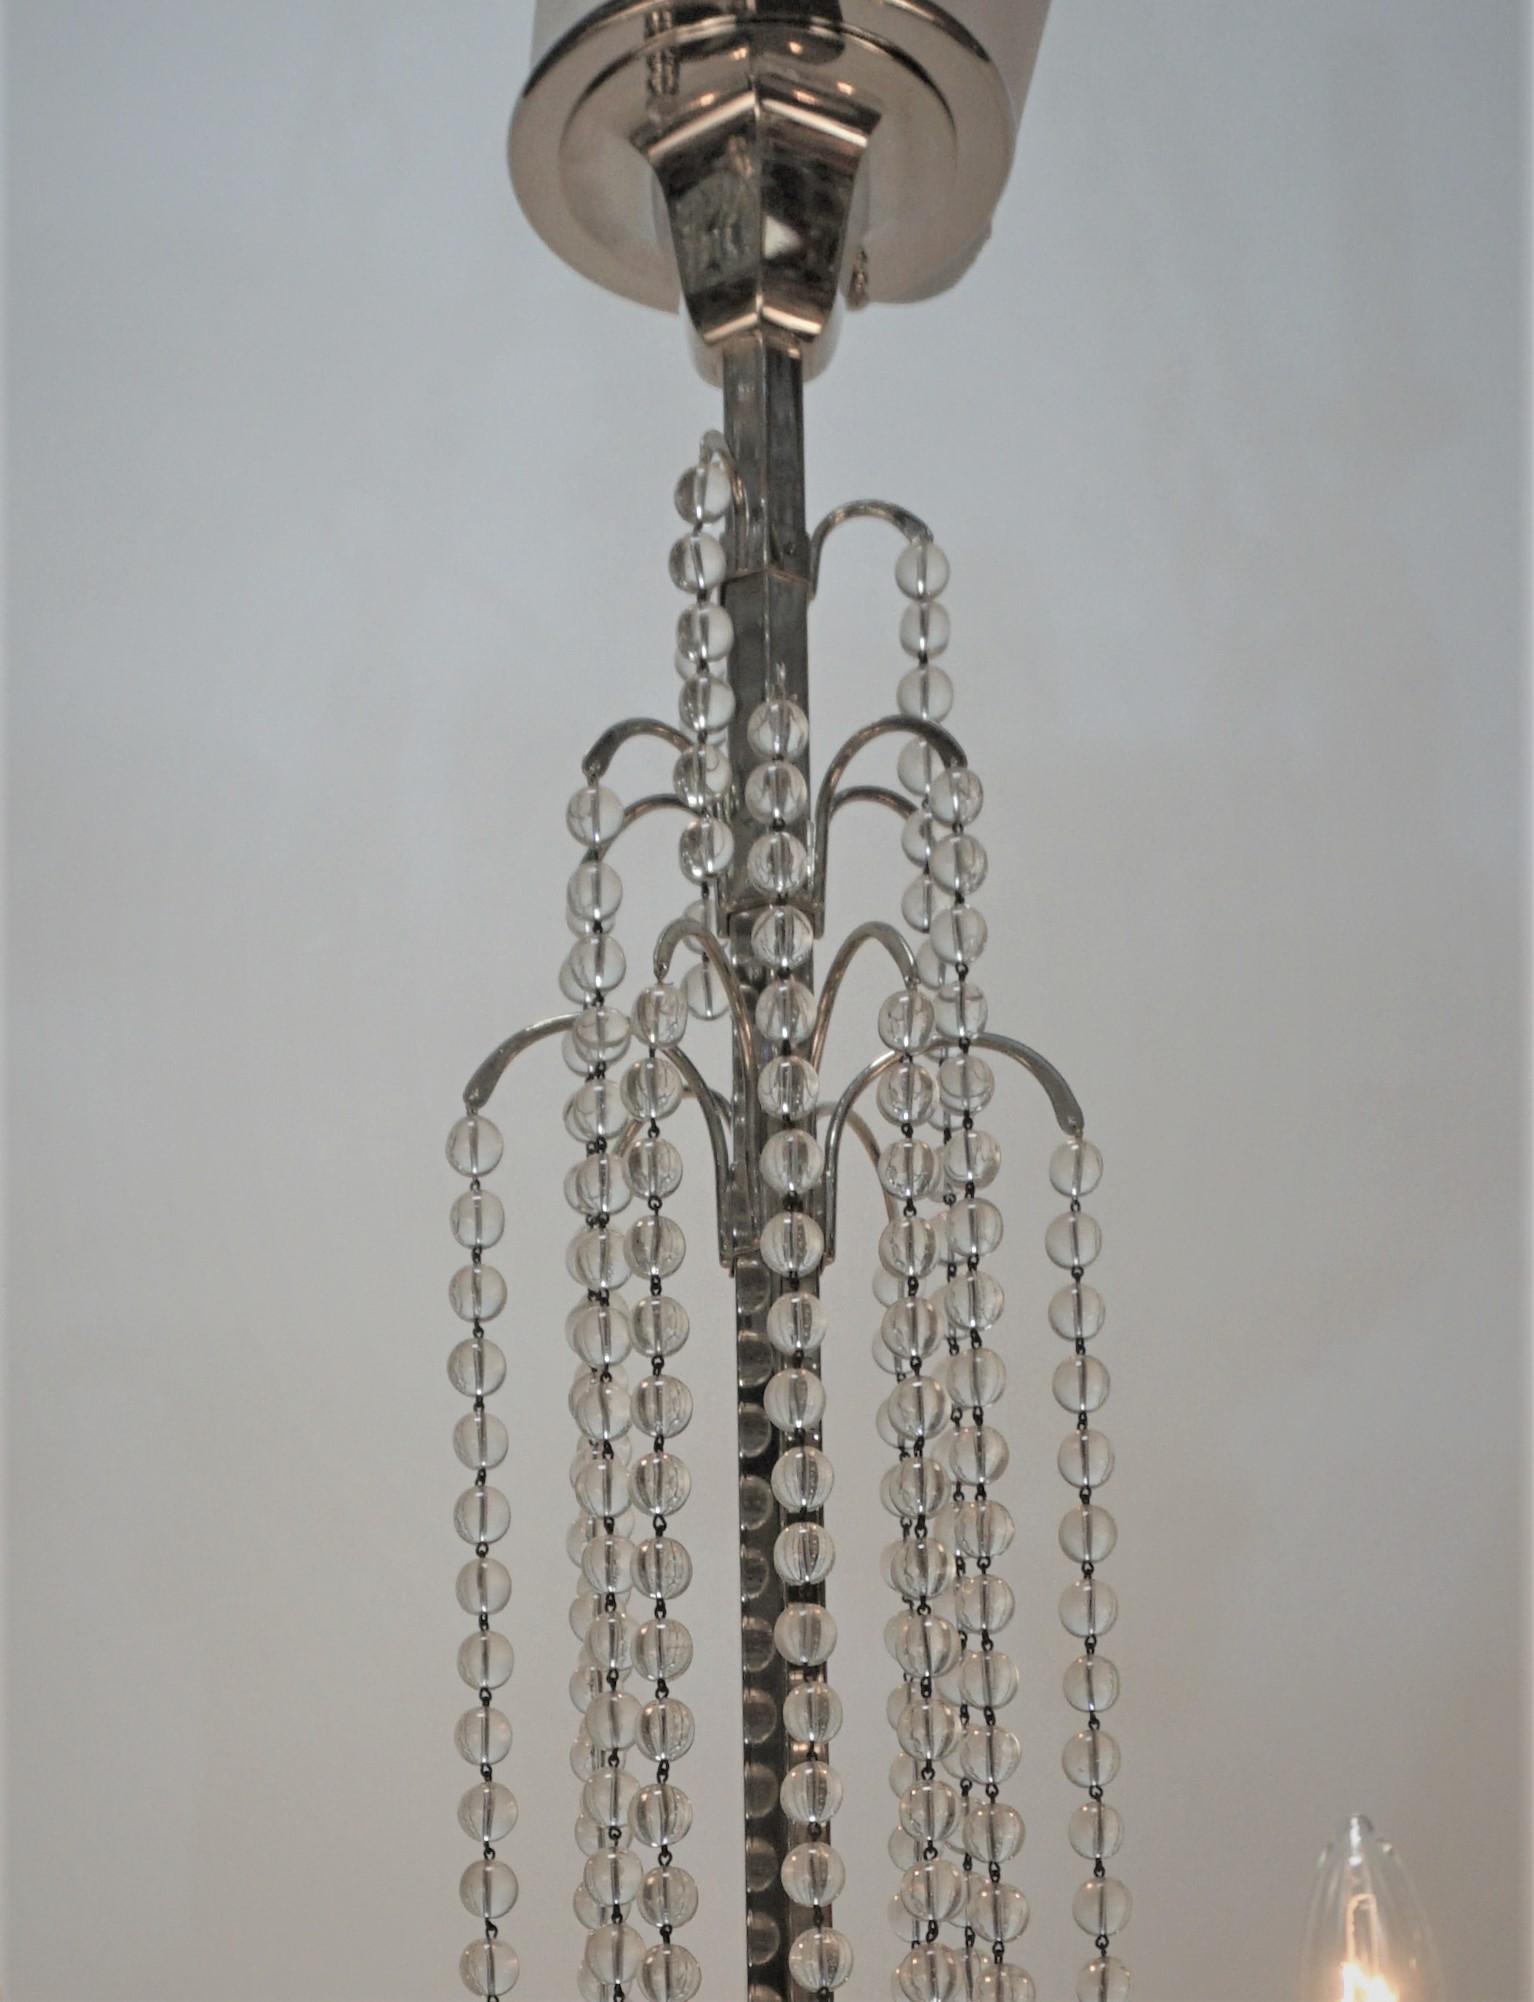 Muller Freres 1930's Crystal Art Deco Chandelier In Good Condition For Sale In Fairfax, VA